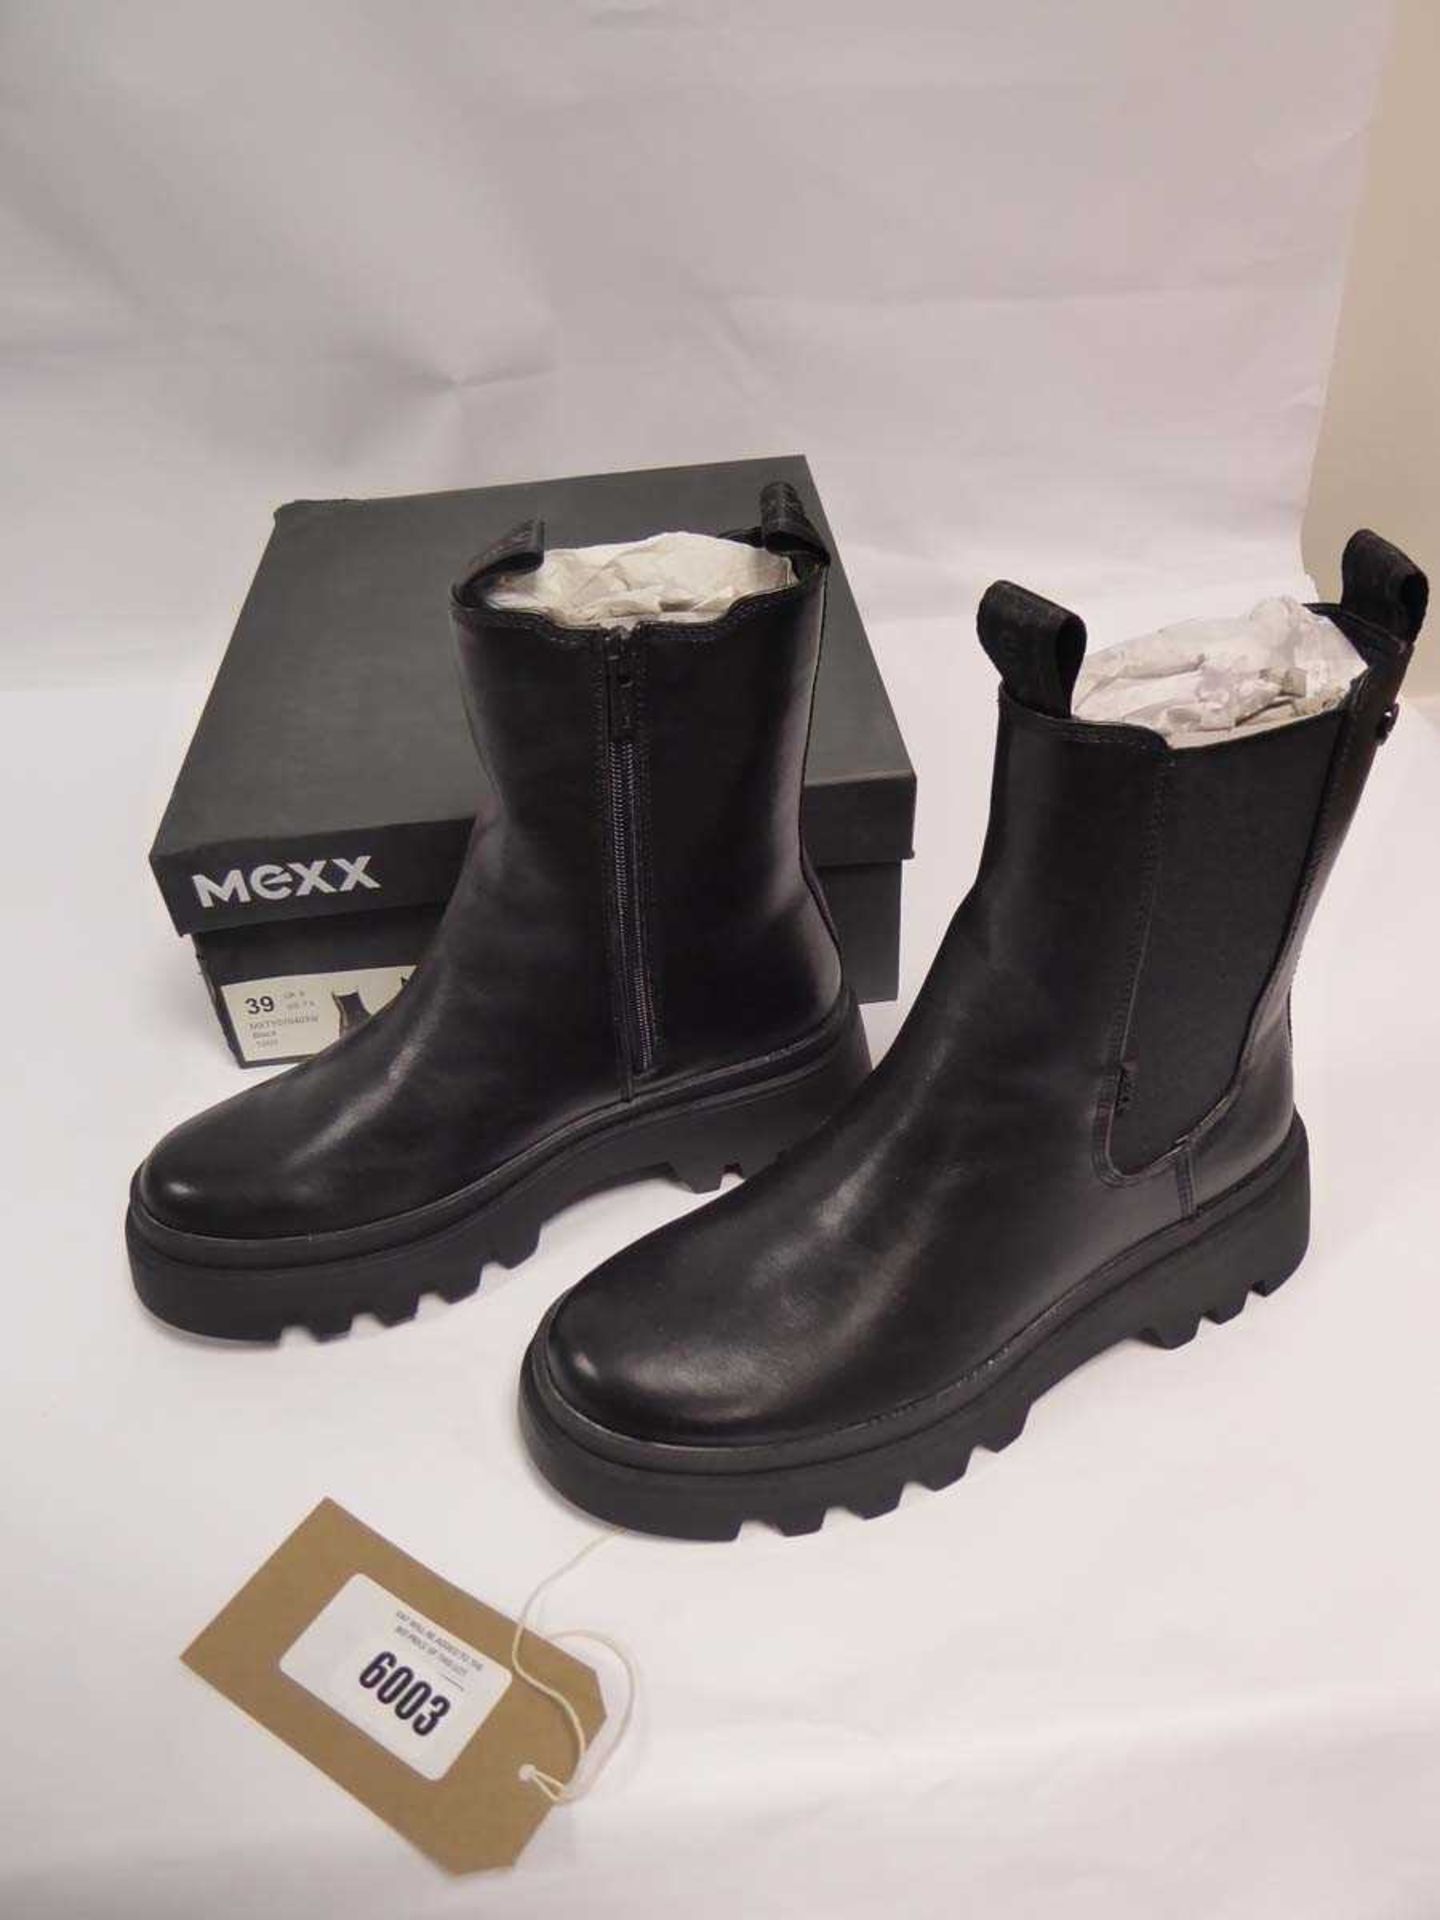 +VAT Pair of boxed Mexx Kayra ankle boots, size 6